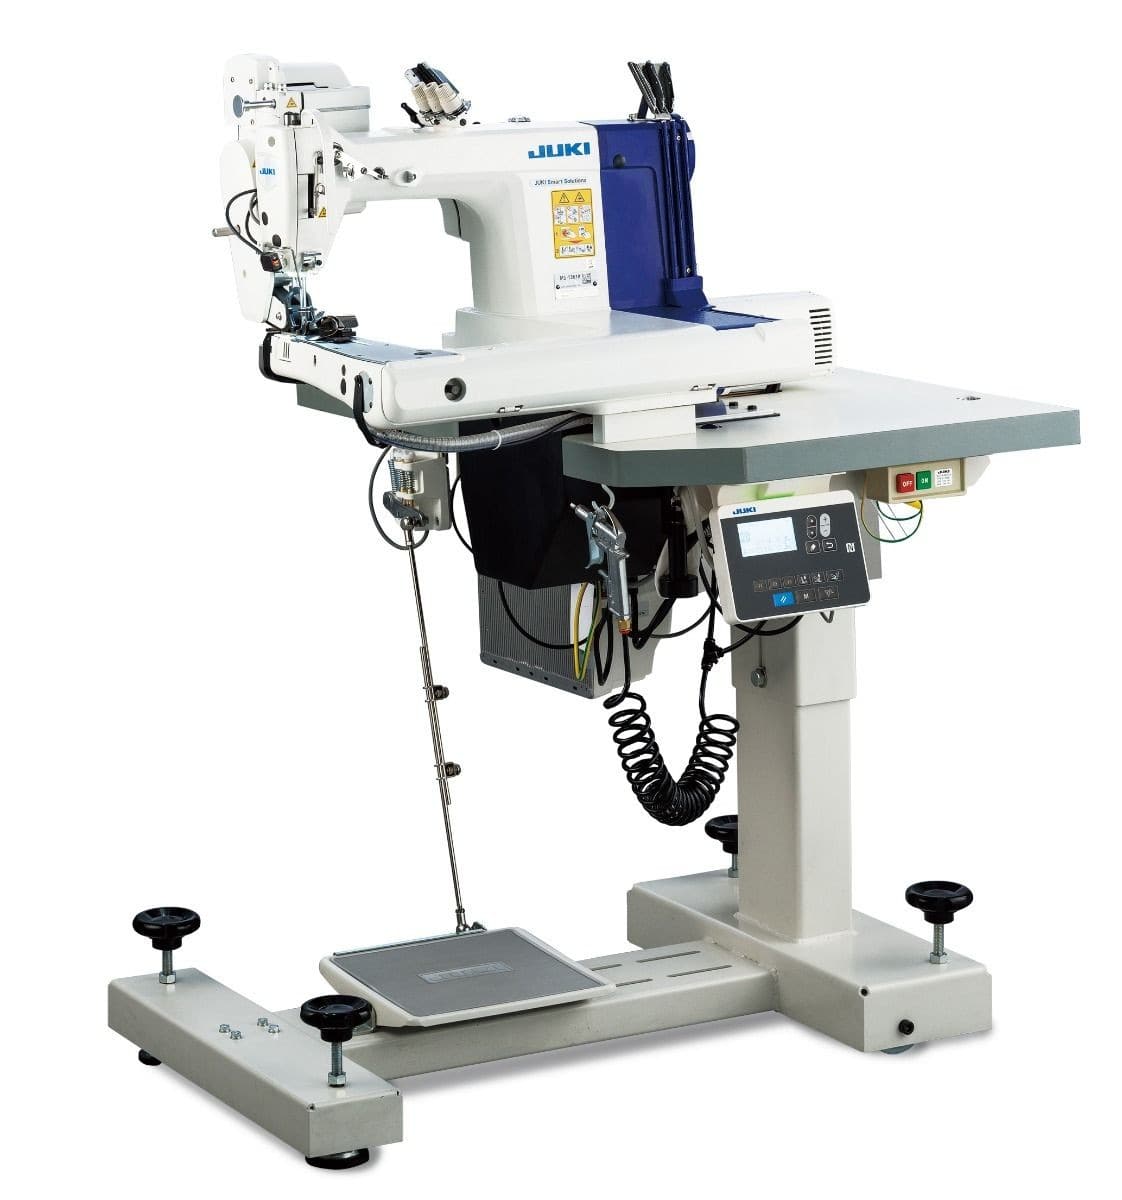 JUKI MS-1261A/DWS
High-speed, feed-off-the-arm, 3-needle double chainstitch sewing system (Digital workstation)